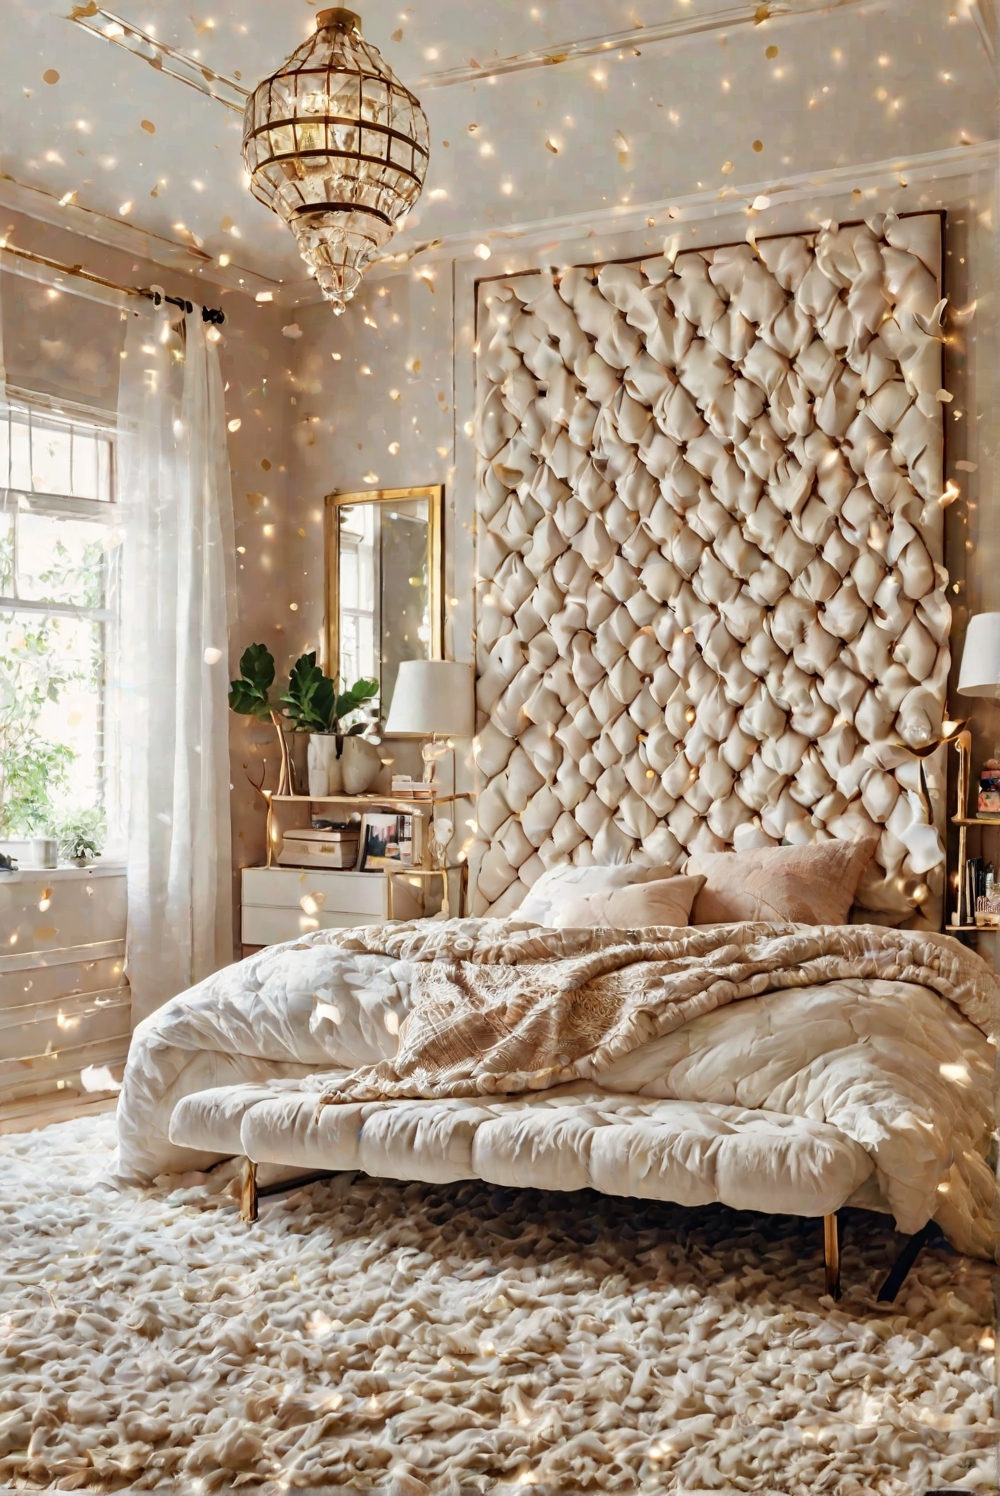 Dreamy Bedroom Escapes: Revitalizing Your Sleep Space